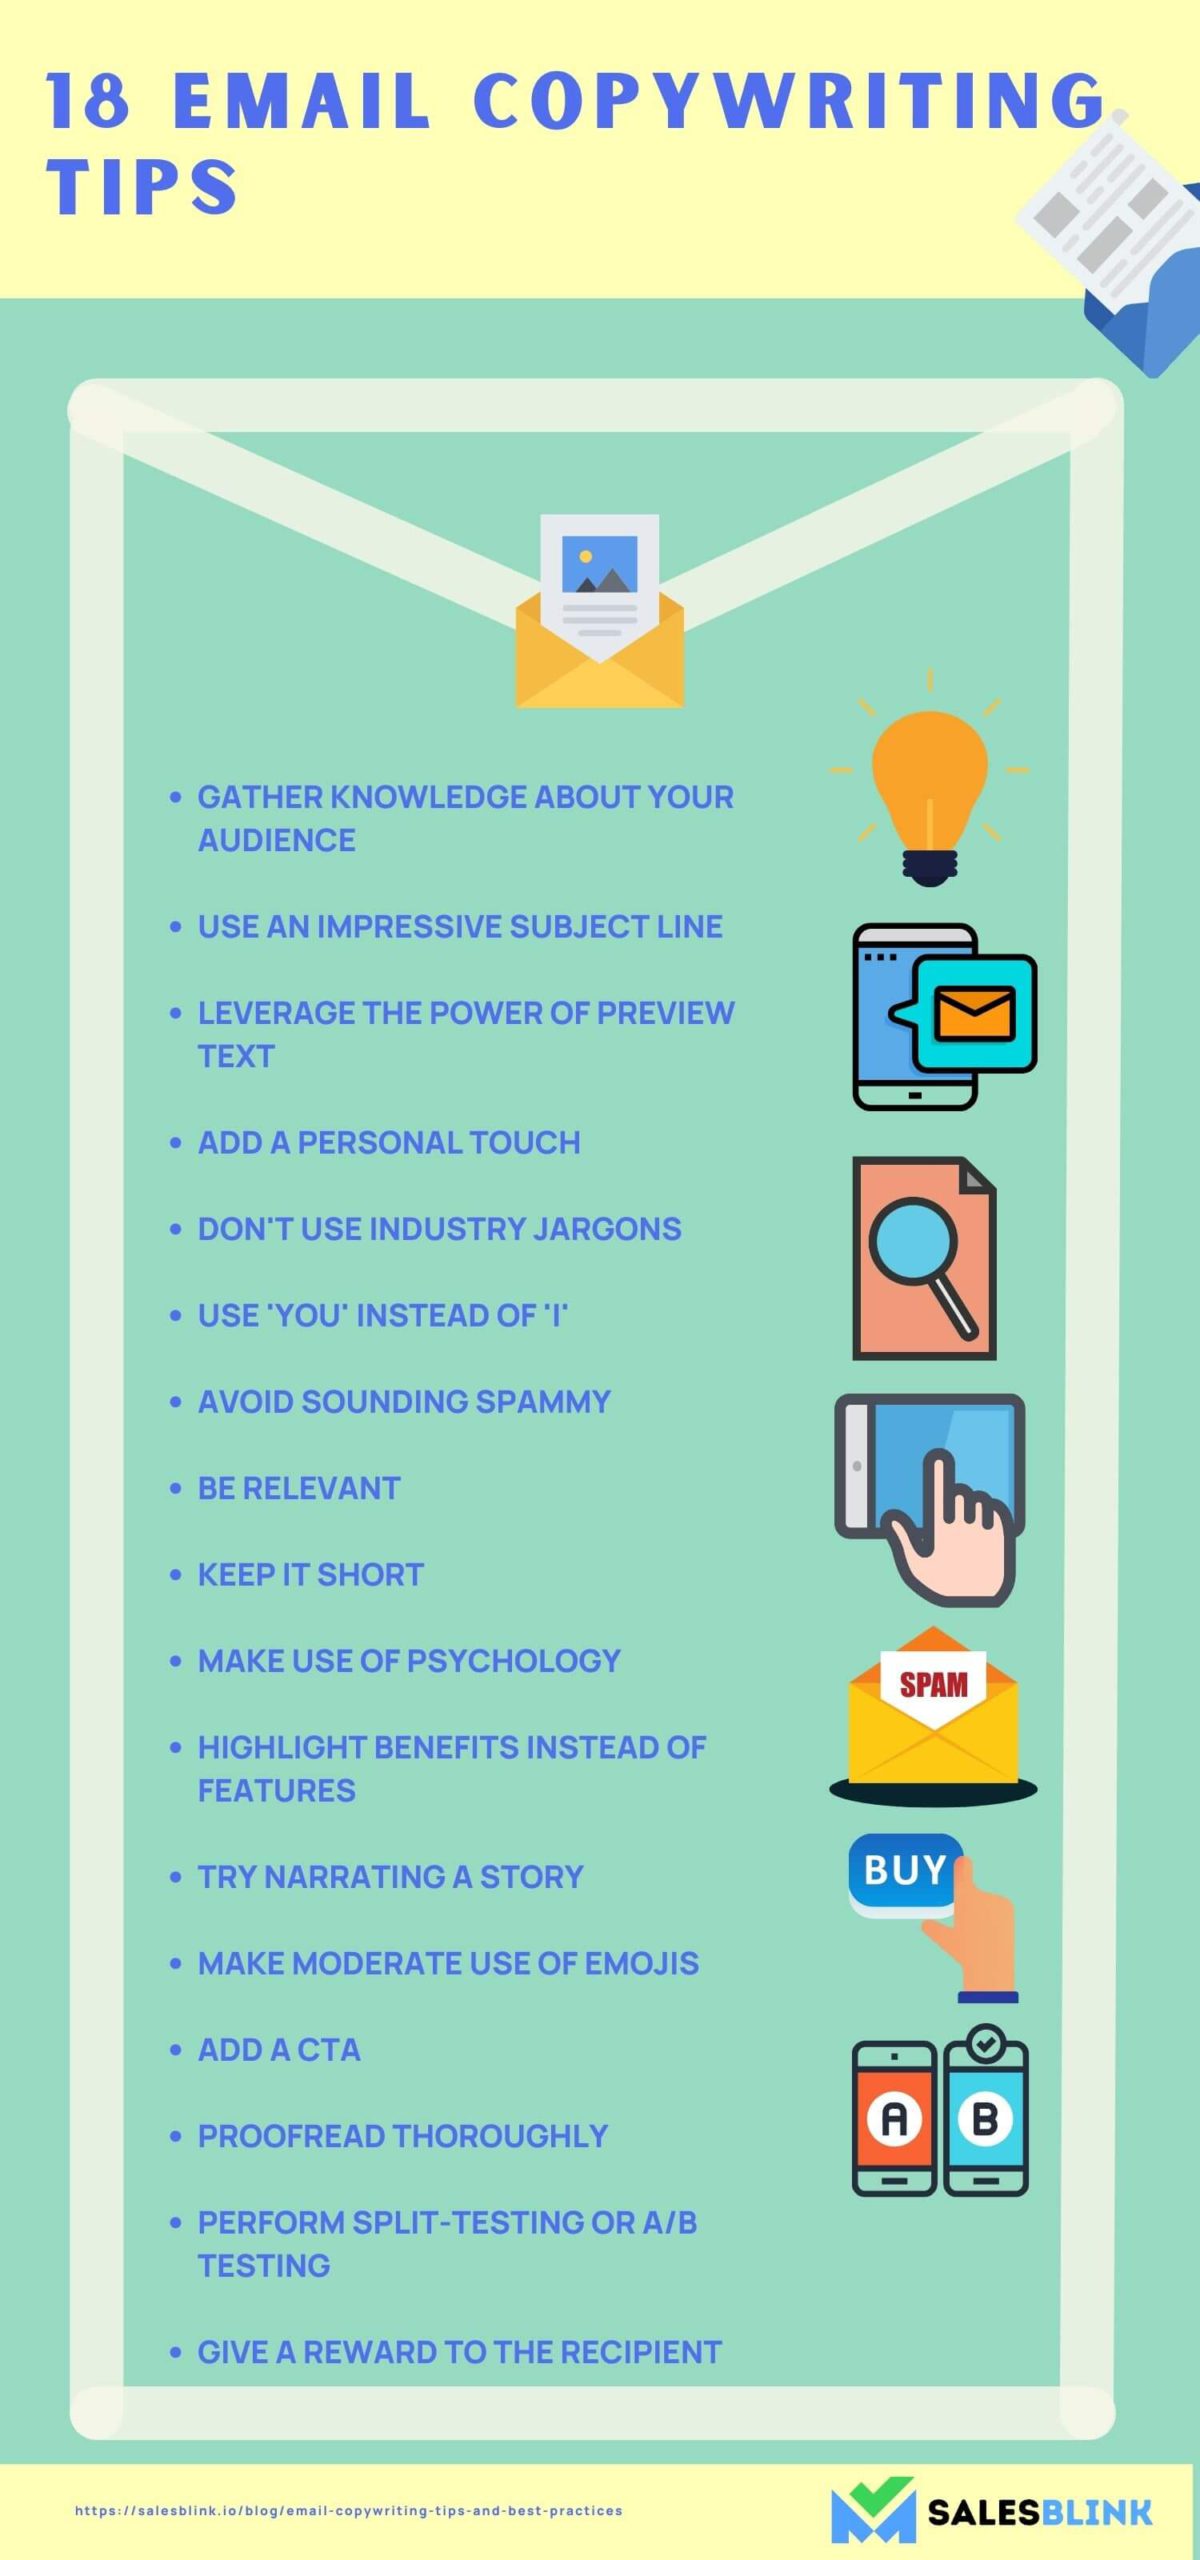 Email Copywriting Tips - Infographic 